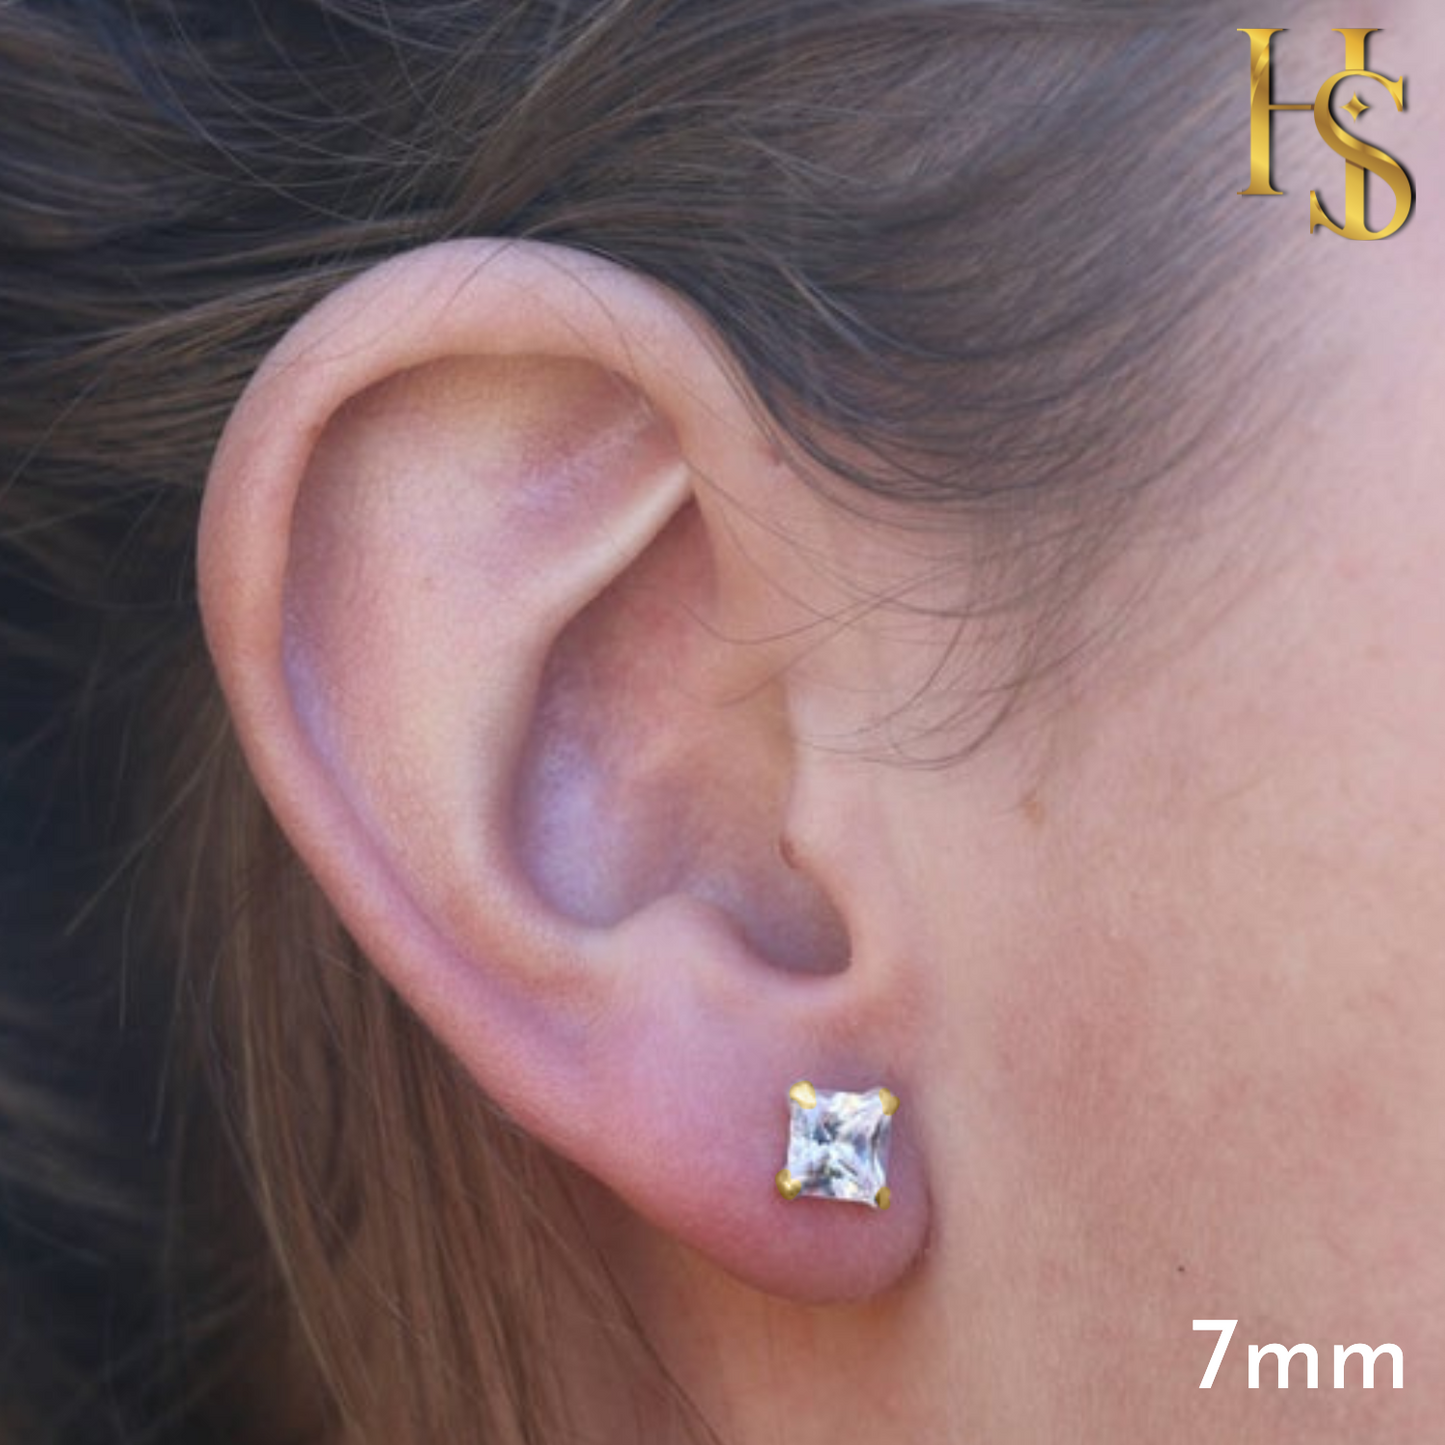 Solitaire Gold Square Stud Earrings in 92.5 Silver - Princess Cut - Brilliant Swiss Zirconia - 18k gold Finish